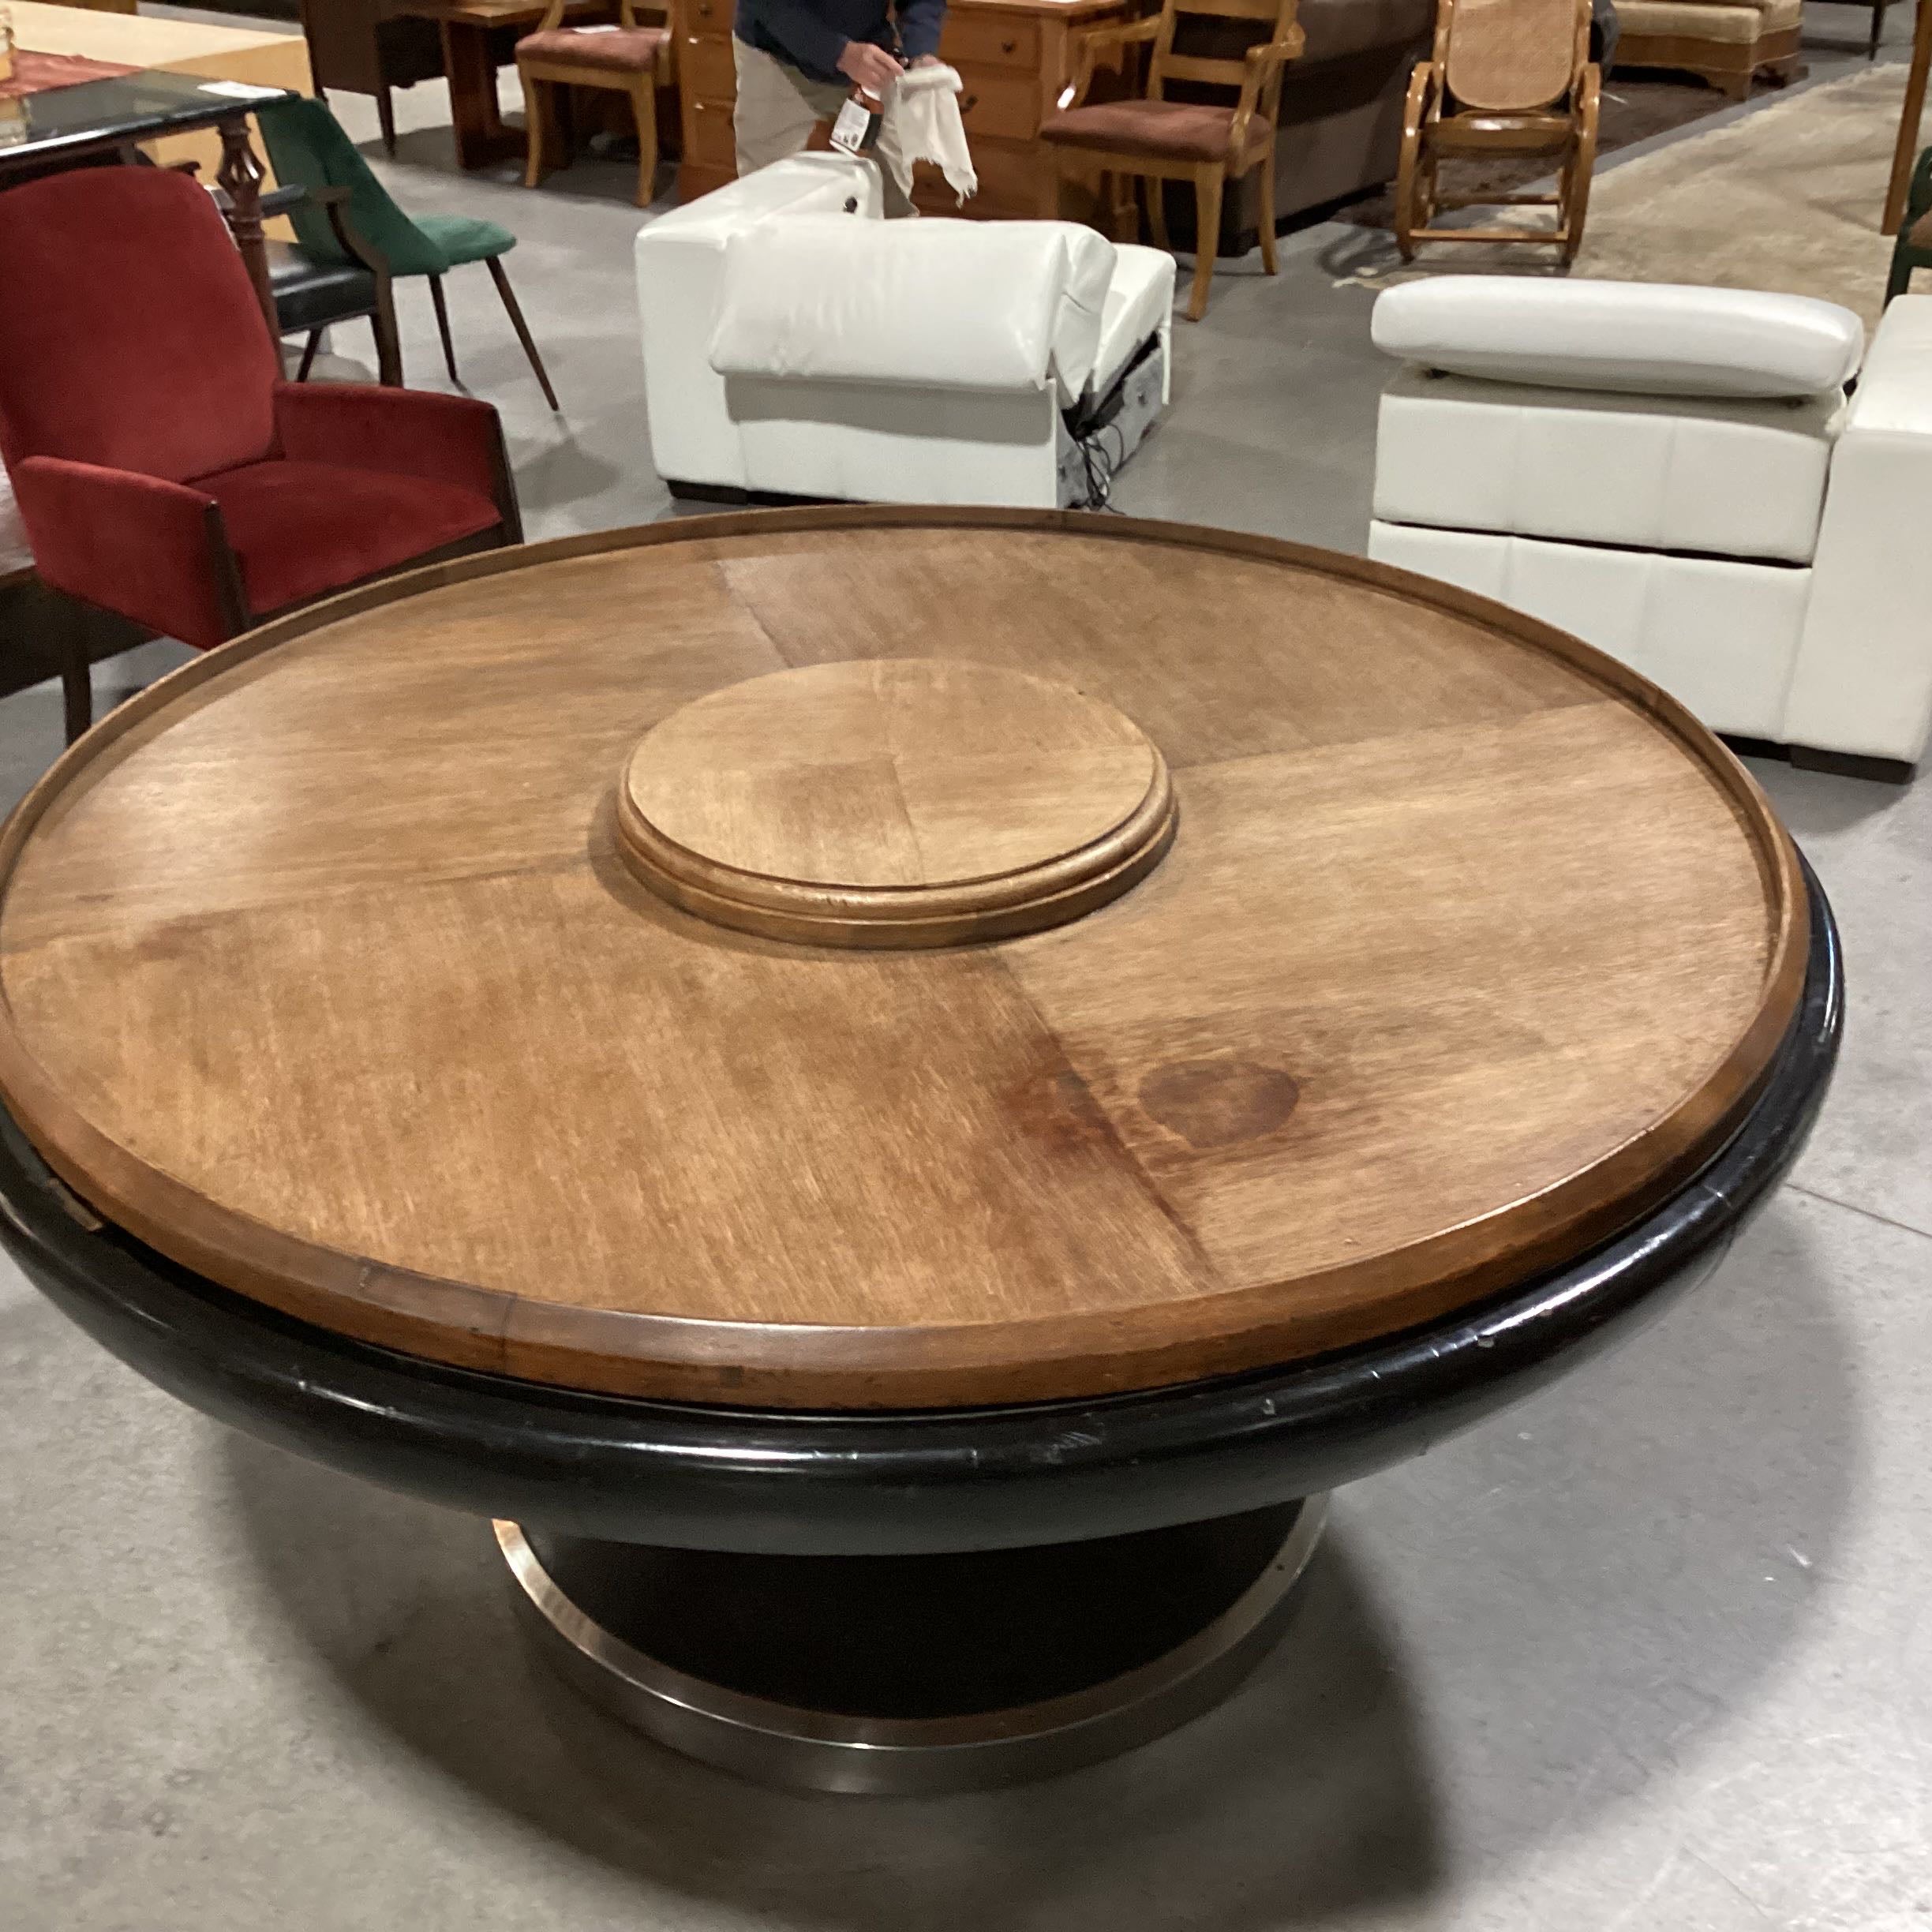 Round Wood and Metal with Wood Pedestal Full Lazy Susan Top Dining Table